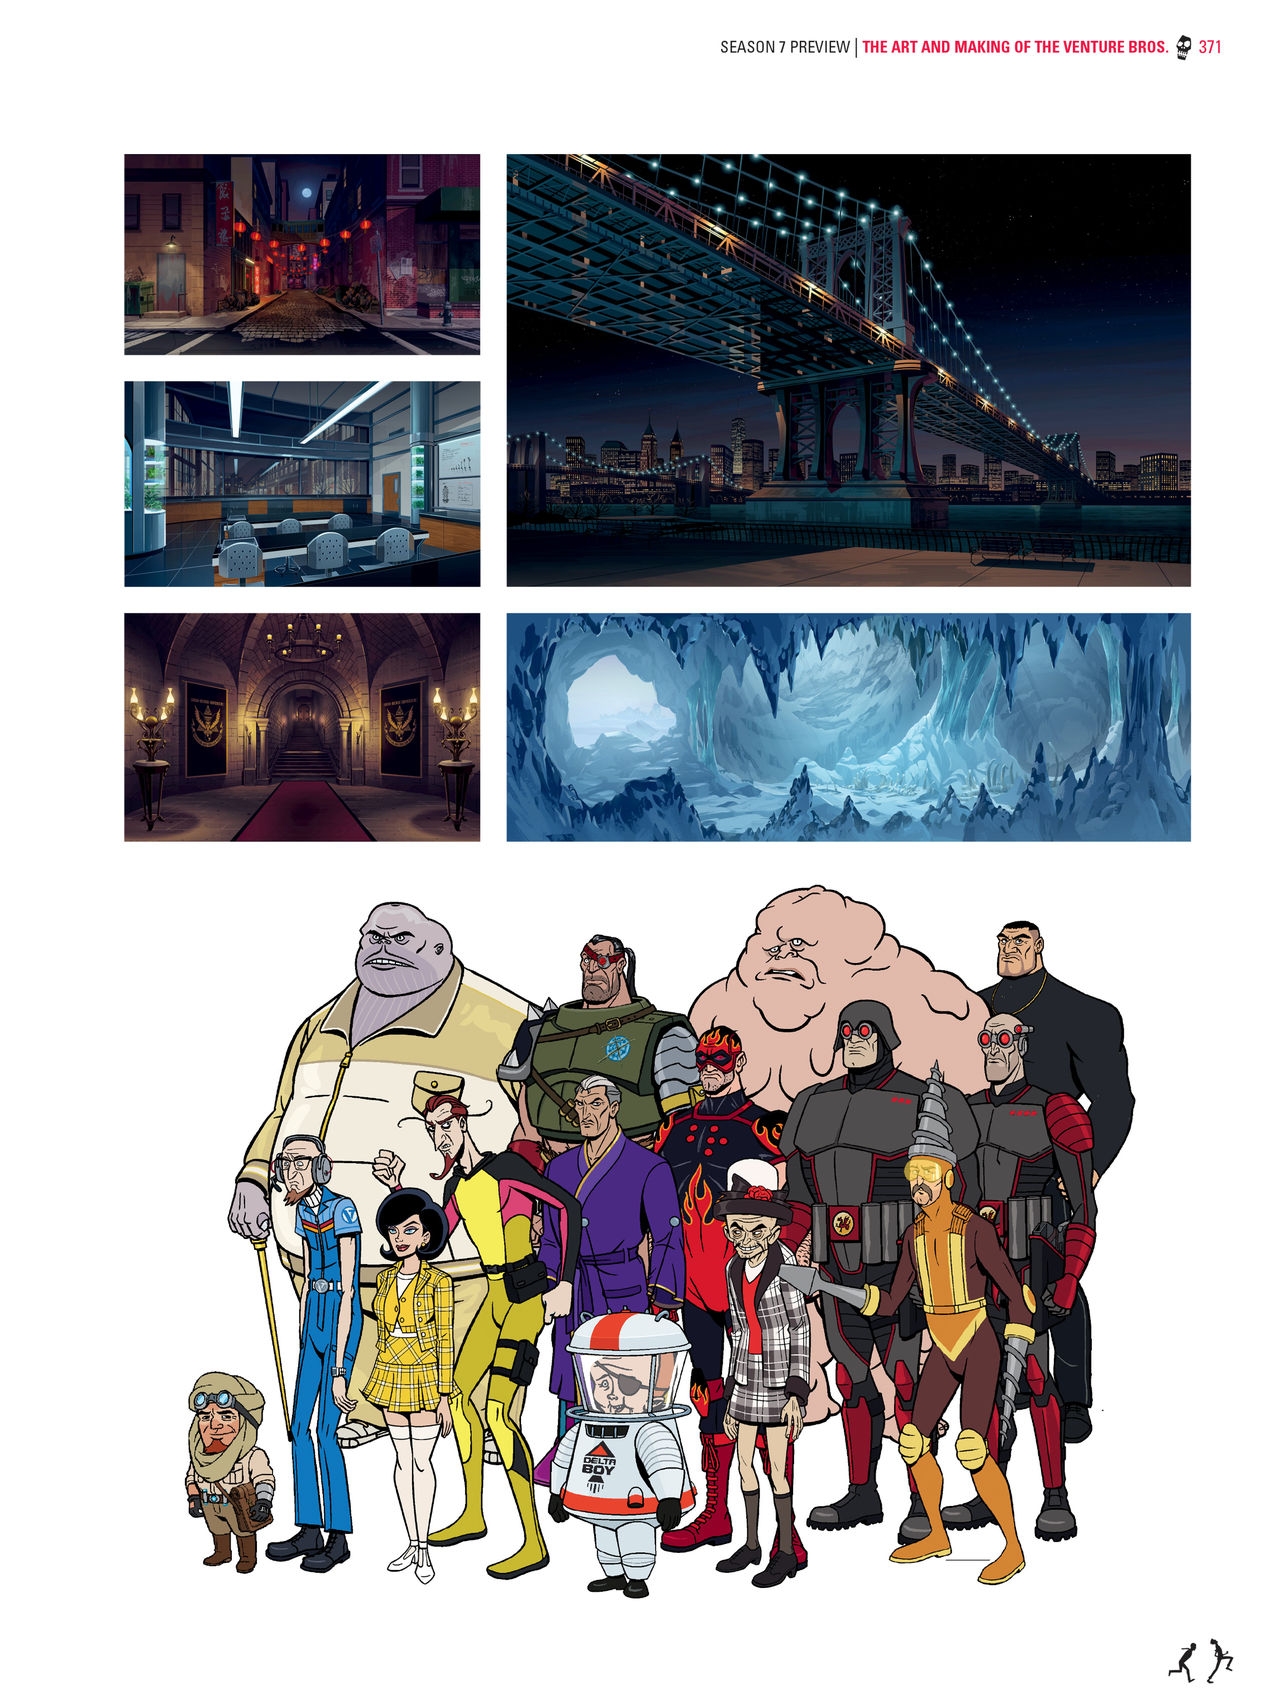 Go Team Venture! - The Art and Making of the Venture Bros 367